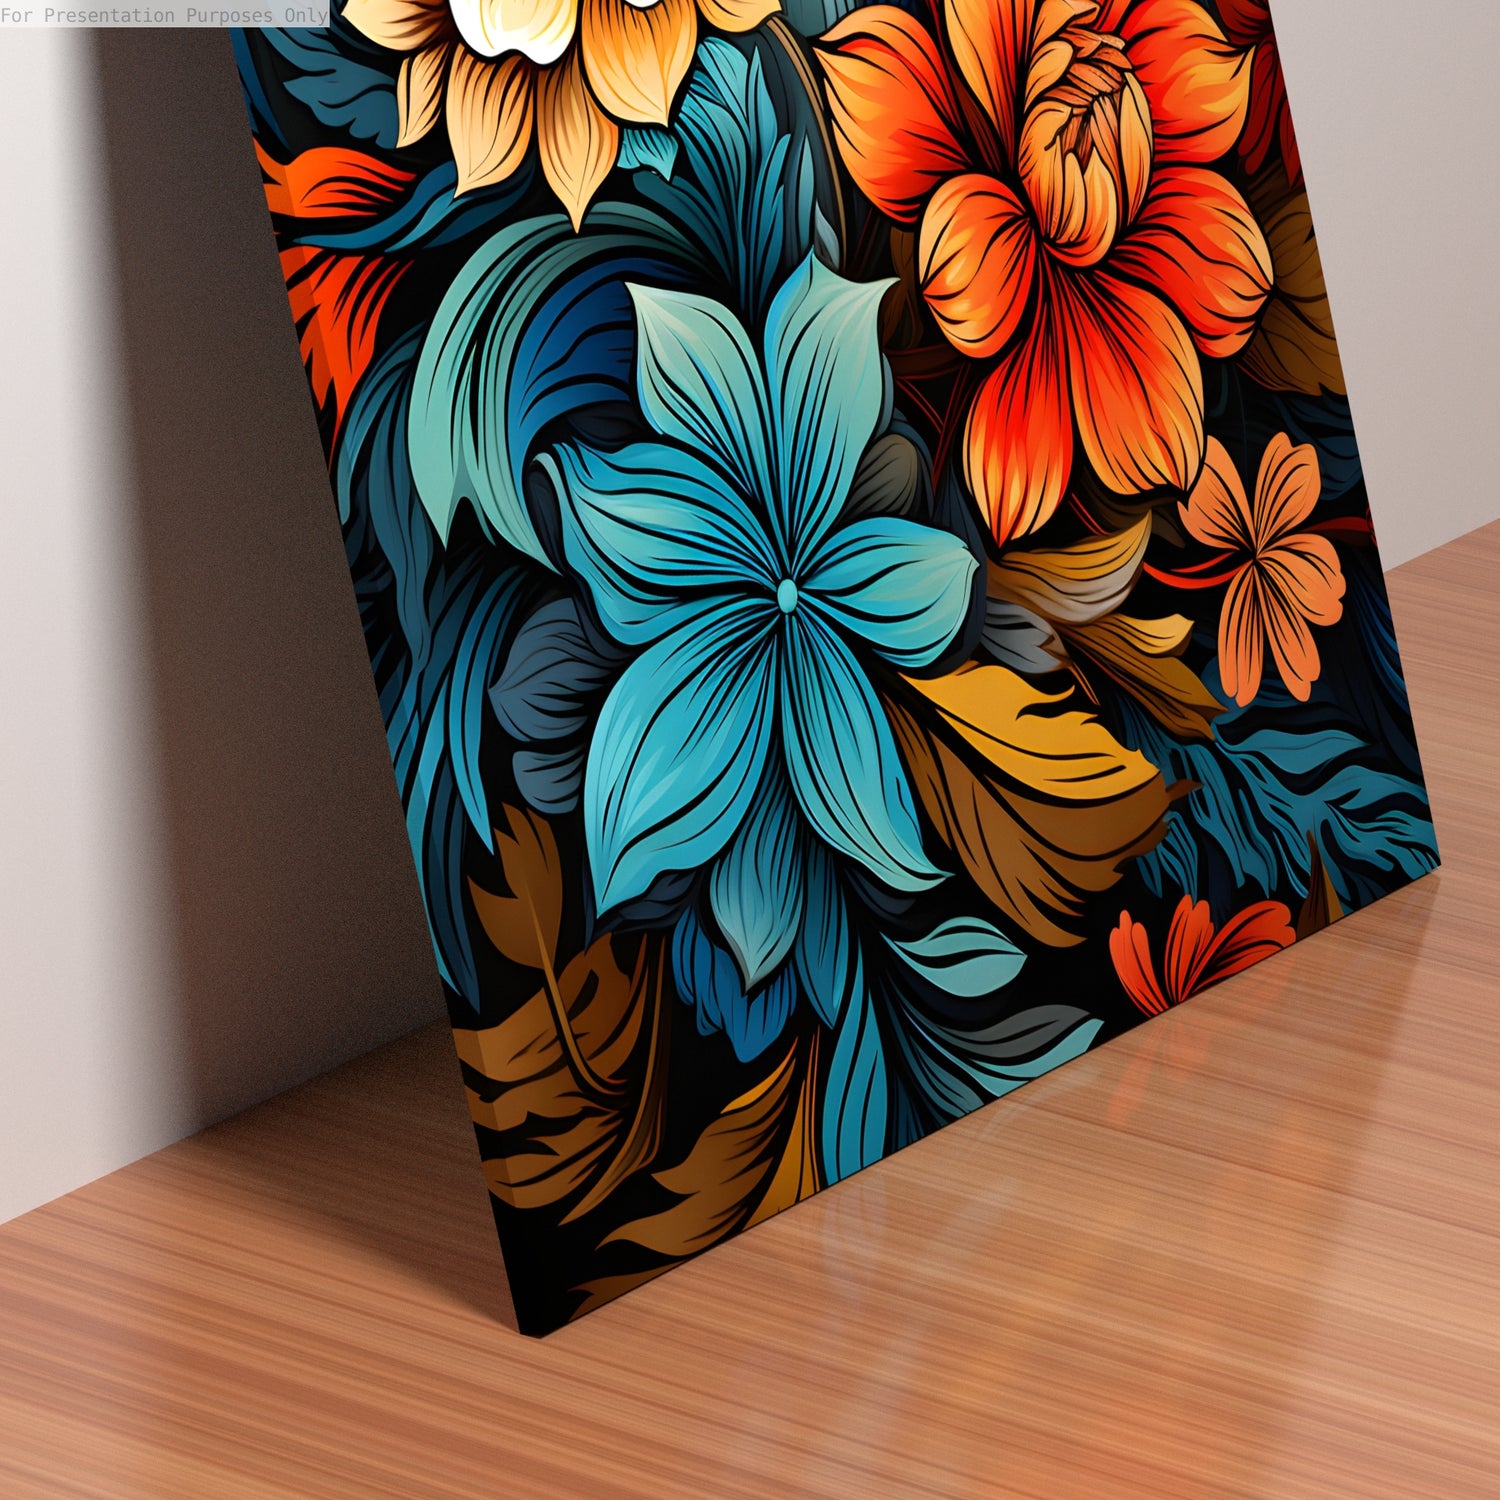 Floral Vibrance Art Poster Panel Side View | AttoPlate